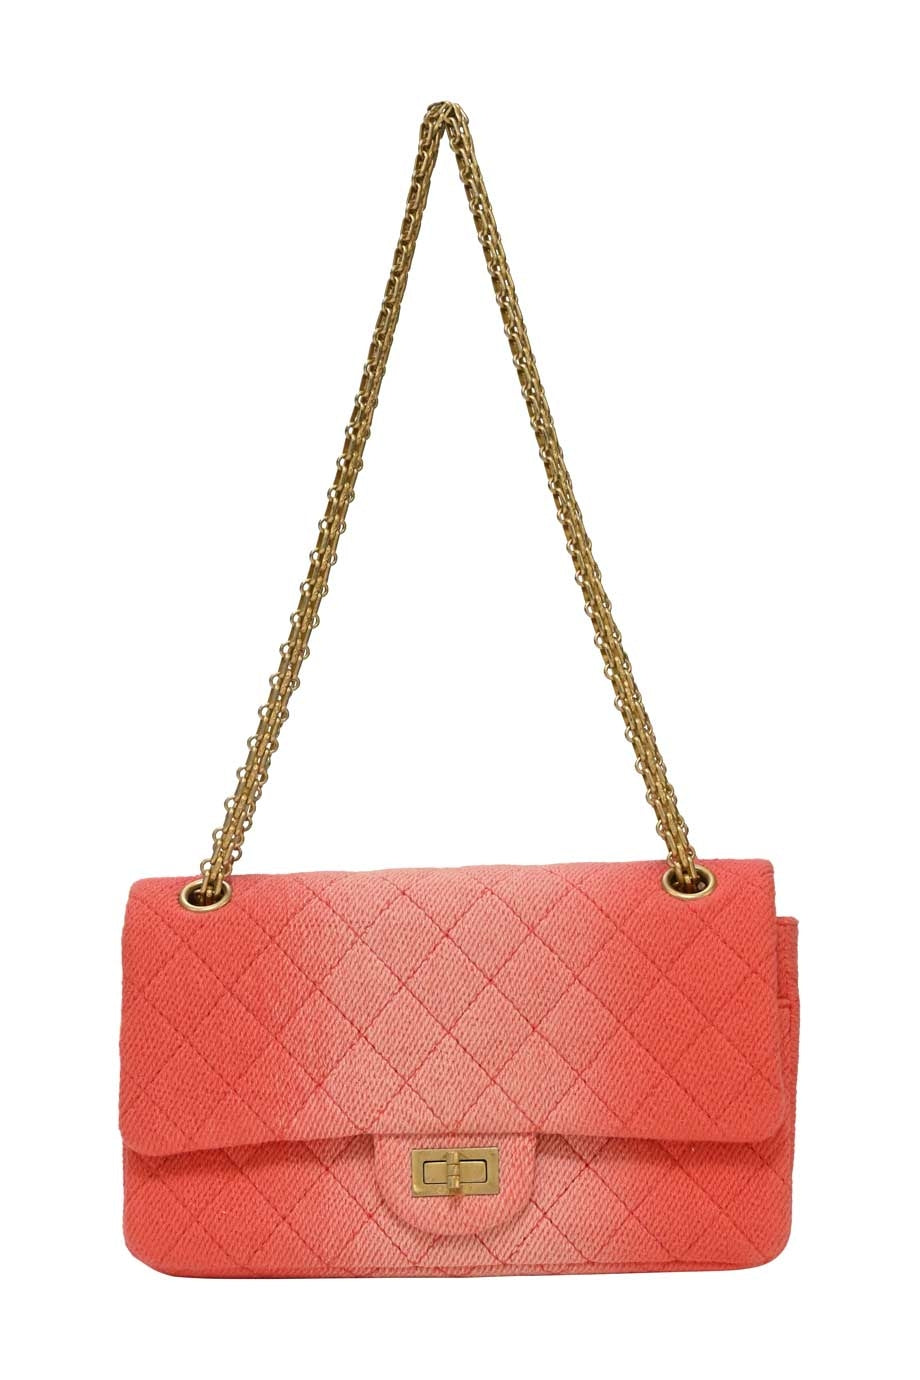 Buy Chanel Resin Bag Online In India -  India